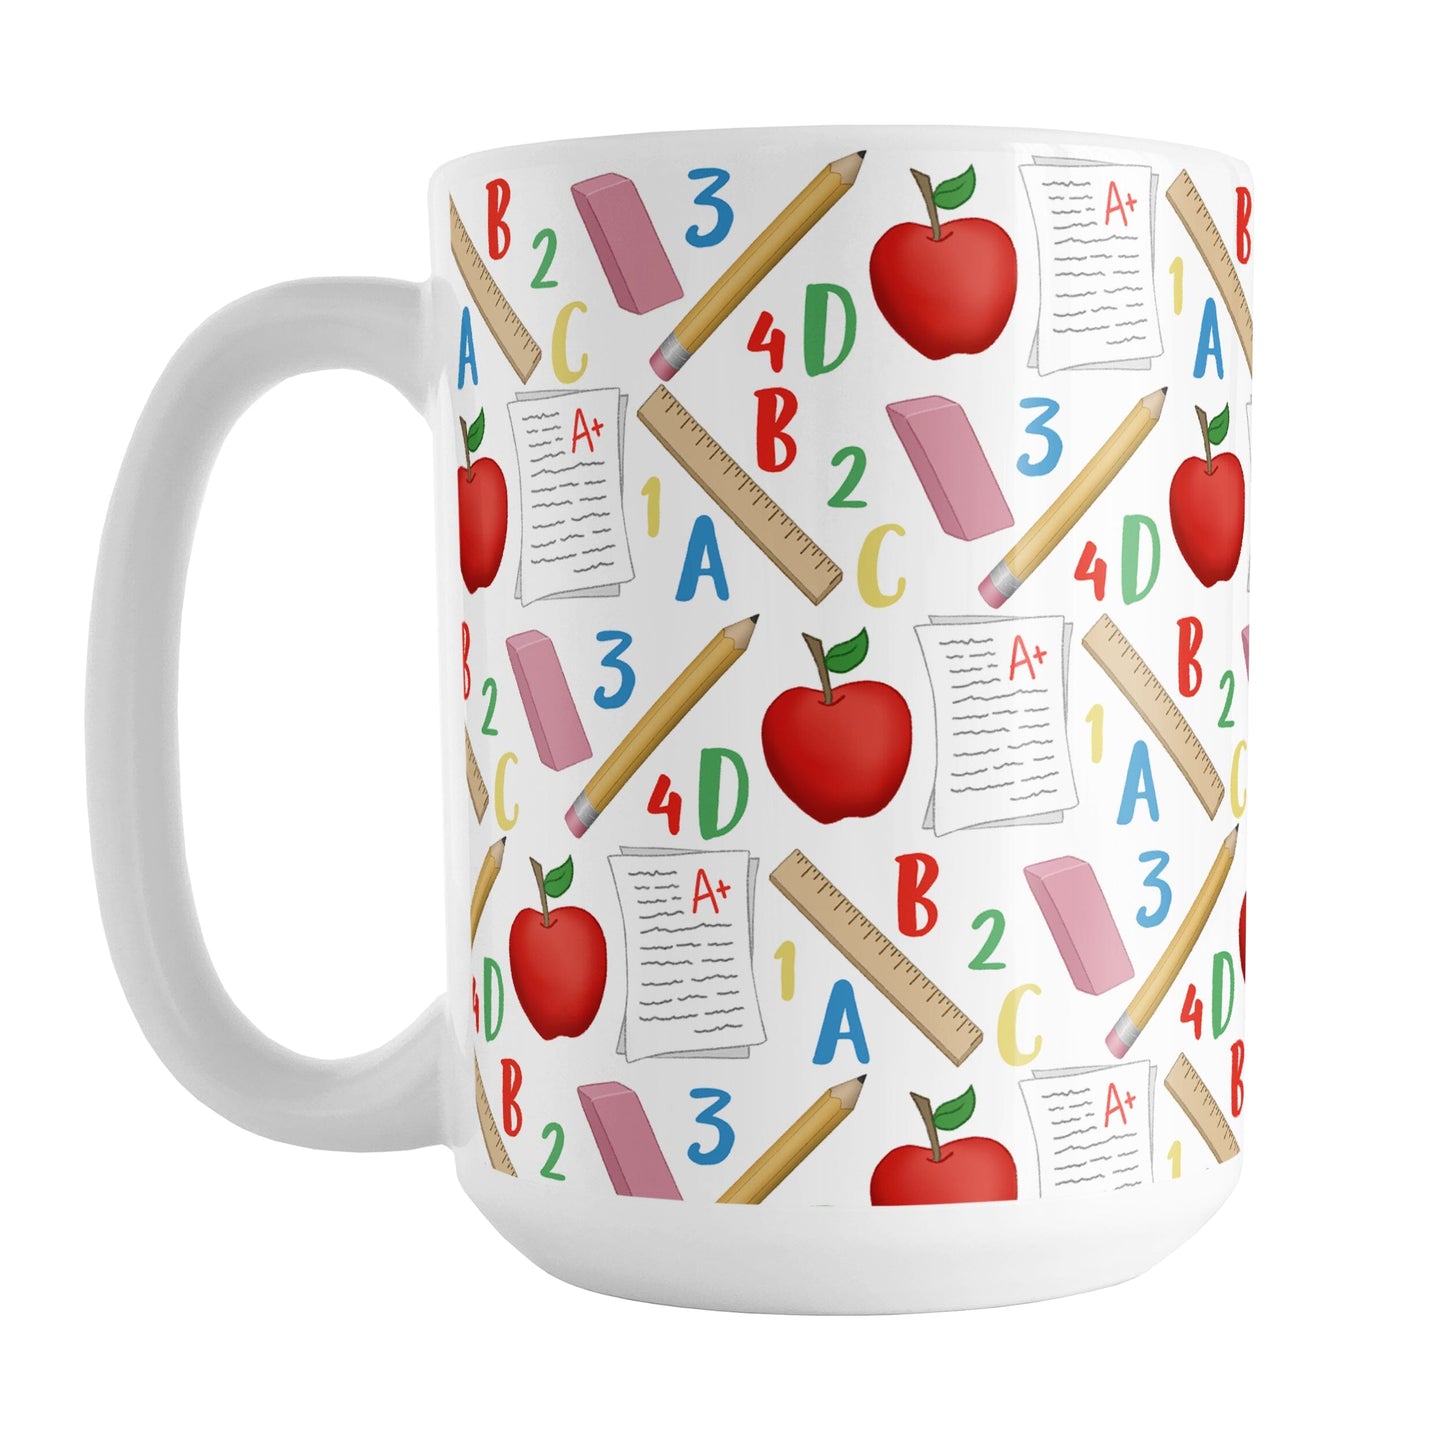 School Pattern Mug (15oz) at Amy's Coffee Mugs. A ceramic coffee mug designed with a school-themed pattern with apples, rulers, erasers, graded papers, numbers, and letters that wraps around the mug to the handle. 